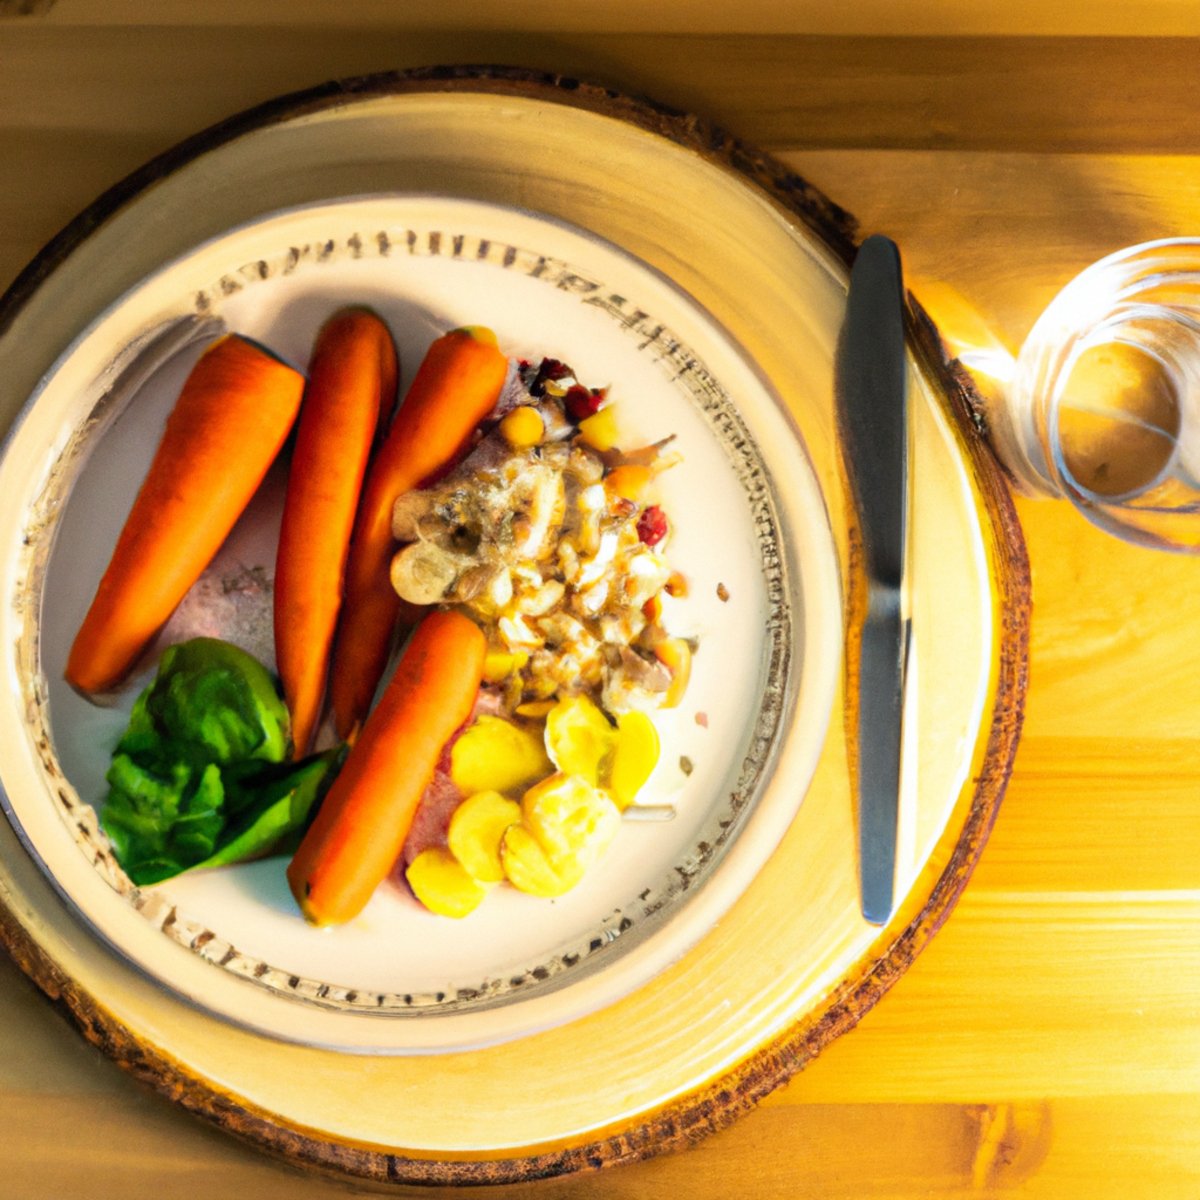 The photo shows a wooden table with a plate of food, a glass of water, and a stopwatch. The plate contains a colorful assortment of fruits, vegetables, and lean protein, indicating a healthy meal choice. The stopwatch suggests the concept of time-restricted eating, a common practice during intermittent fasting. The lighting is natural and warm, creating a cozy and inviting atmosphere. Overall, the photo conveys the idea of mindful and intentional eating habits that can positively impact the body during intermittent fasting.